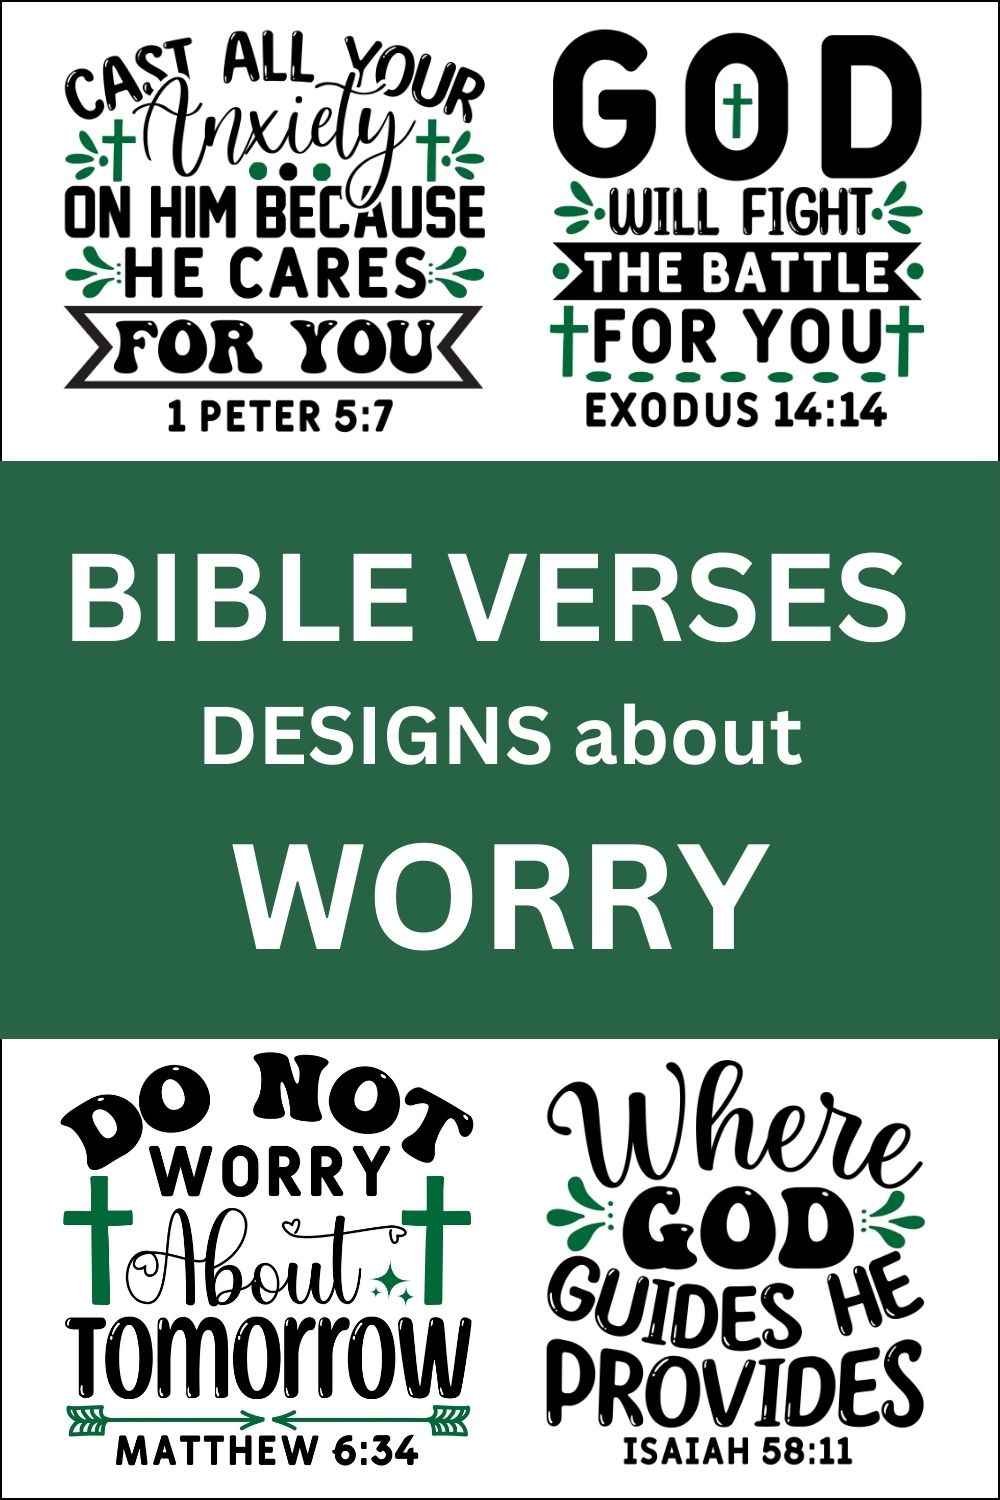 Free printable bundle of Bible Verses about Worry, scripture passages, Cricut designs, DIY patterns, svg files, templates, clip art, stencils, silhouette, embroidery, cut files, design space, vector, crafts, laser cutting, and DIY crafts.